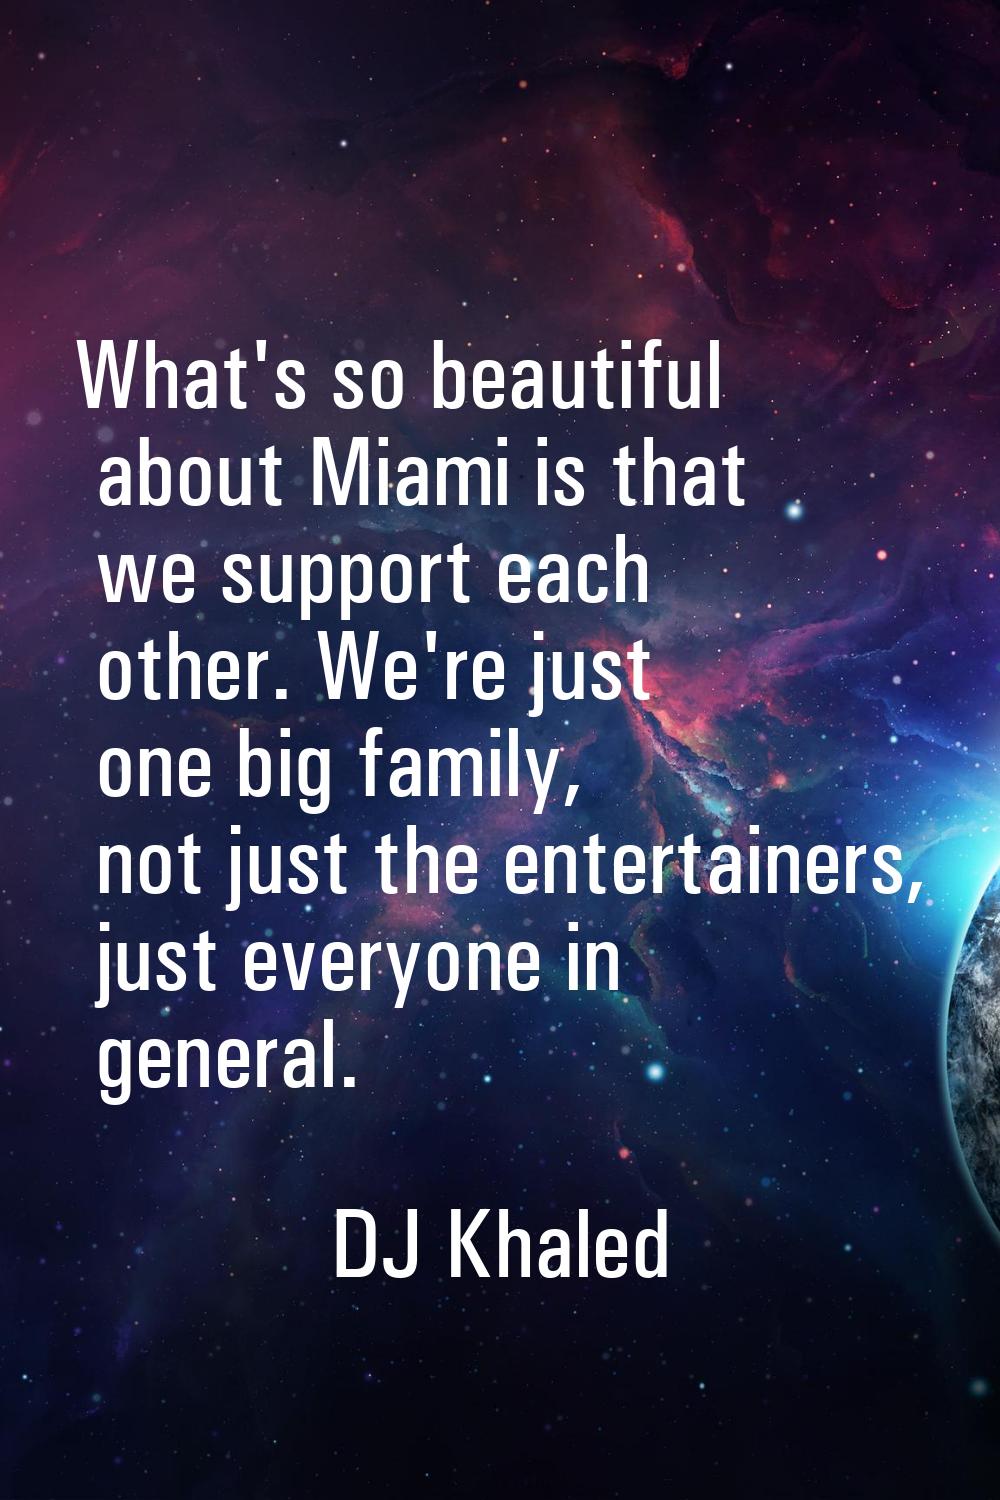 What's so beautiful about Miami is that we support each other. We're just one big family, not just 